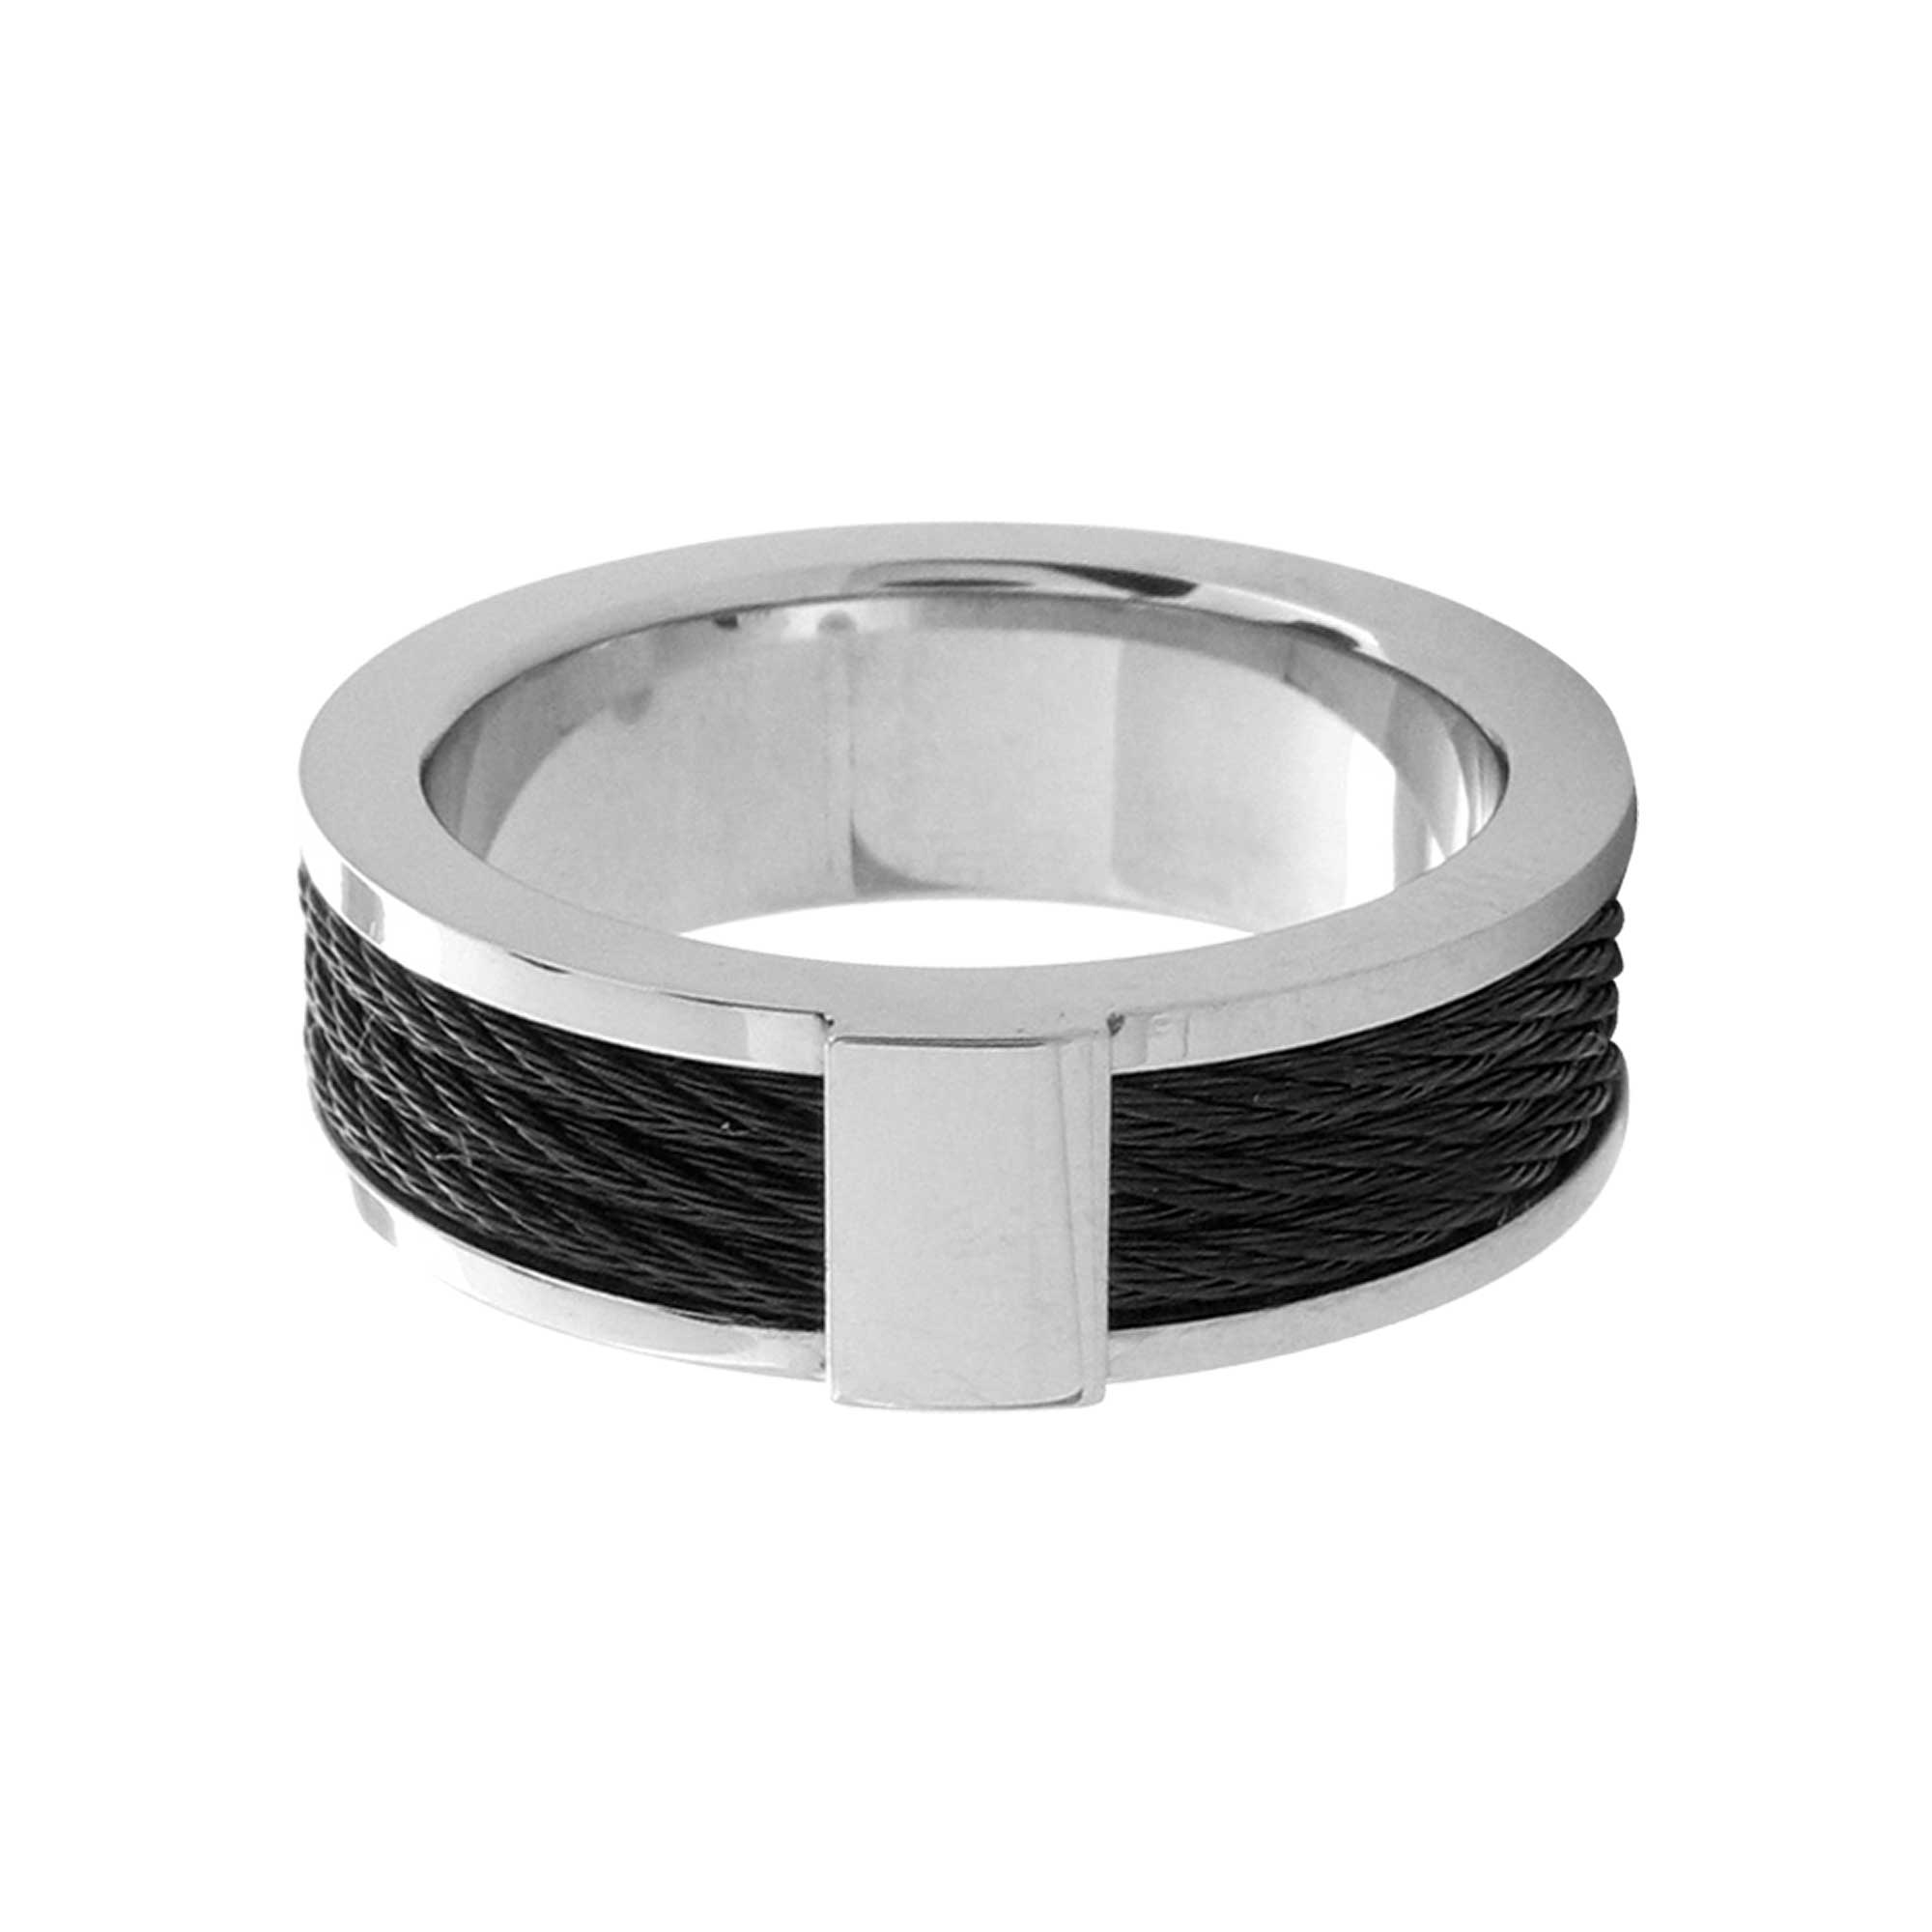 Steel Black Cable Inlayed Comfort Fit Ring Image 2 Lewis Jewelers, Inc. Ansonia, CT